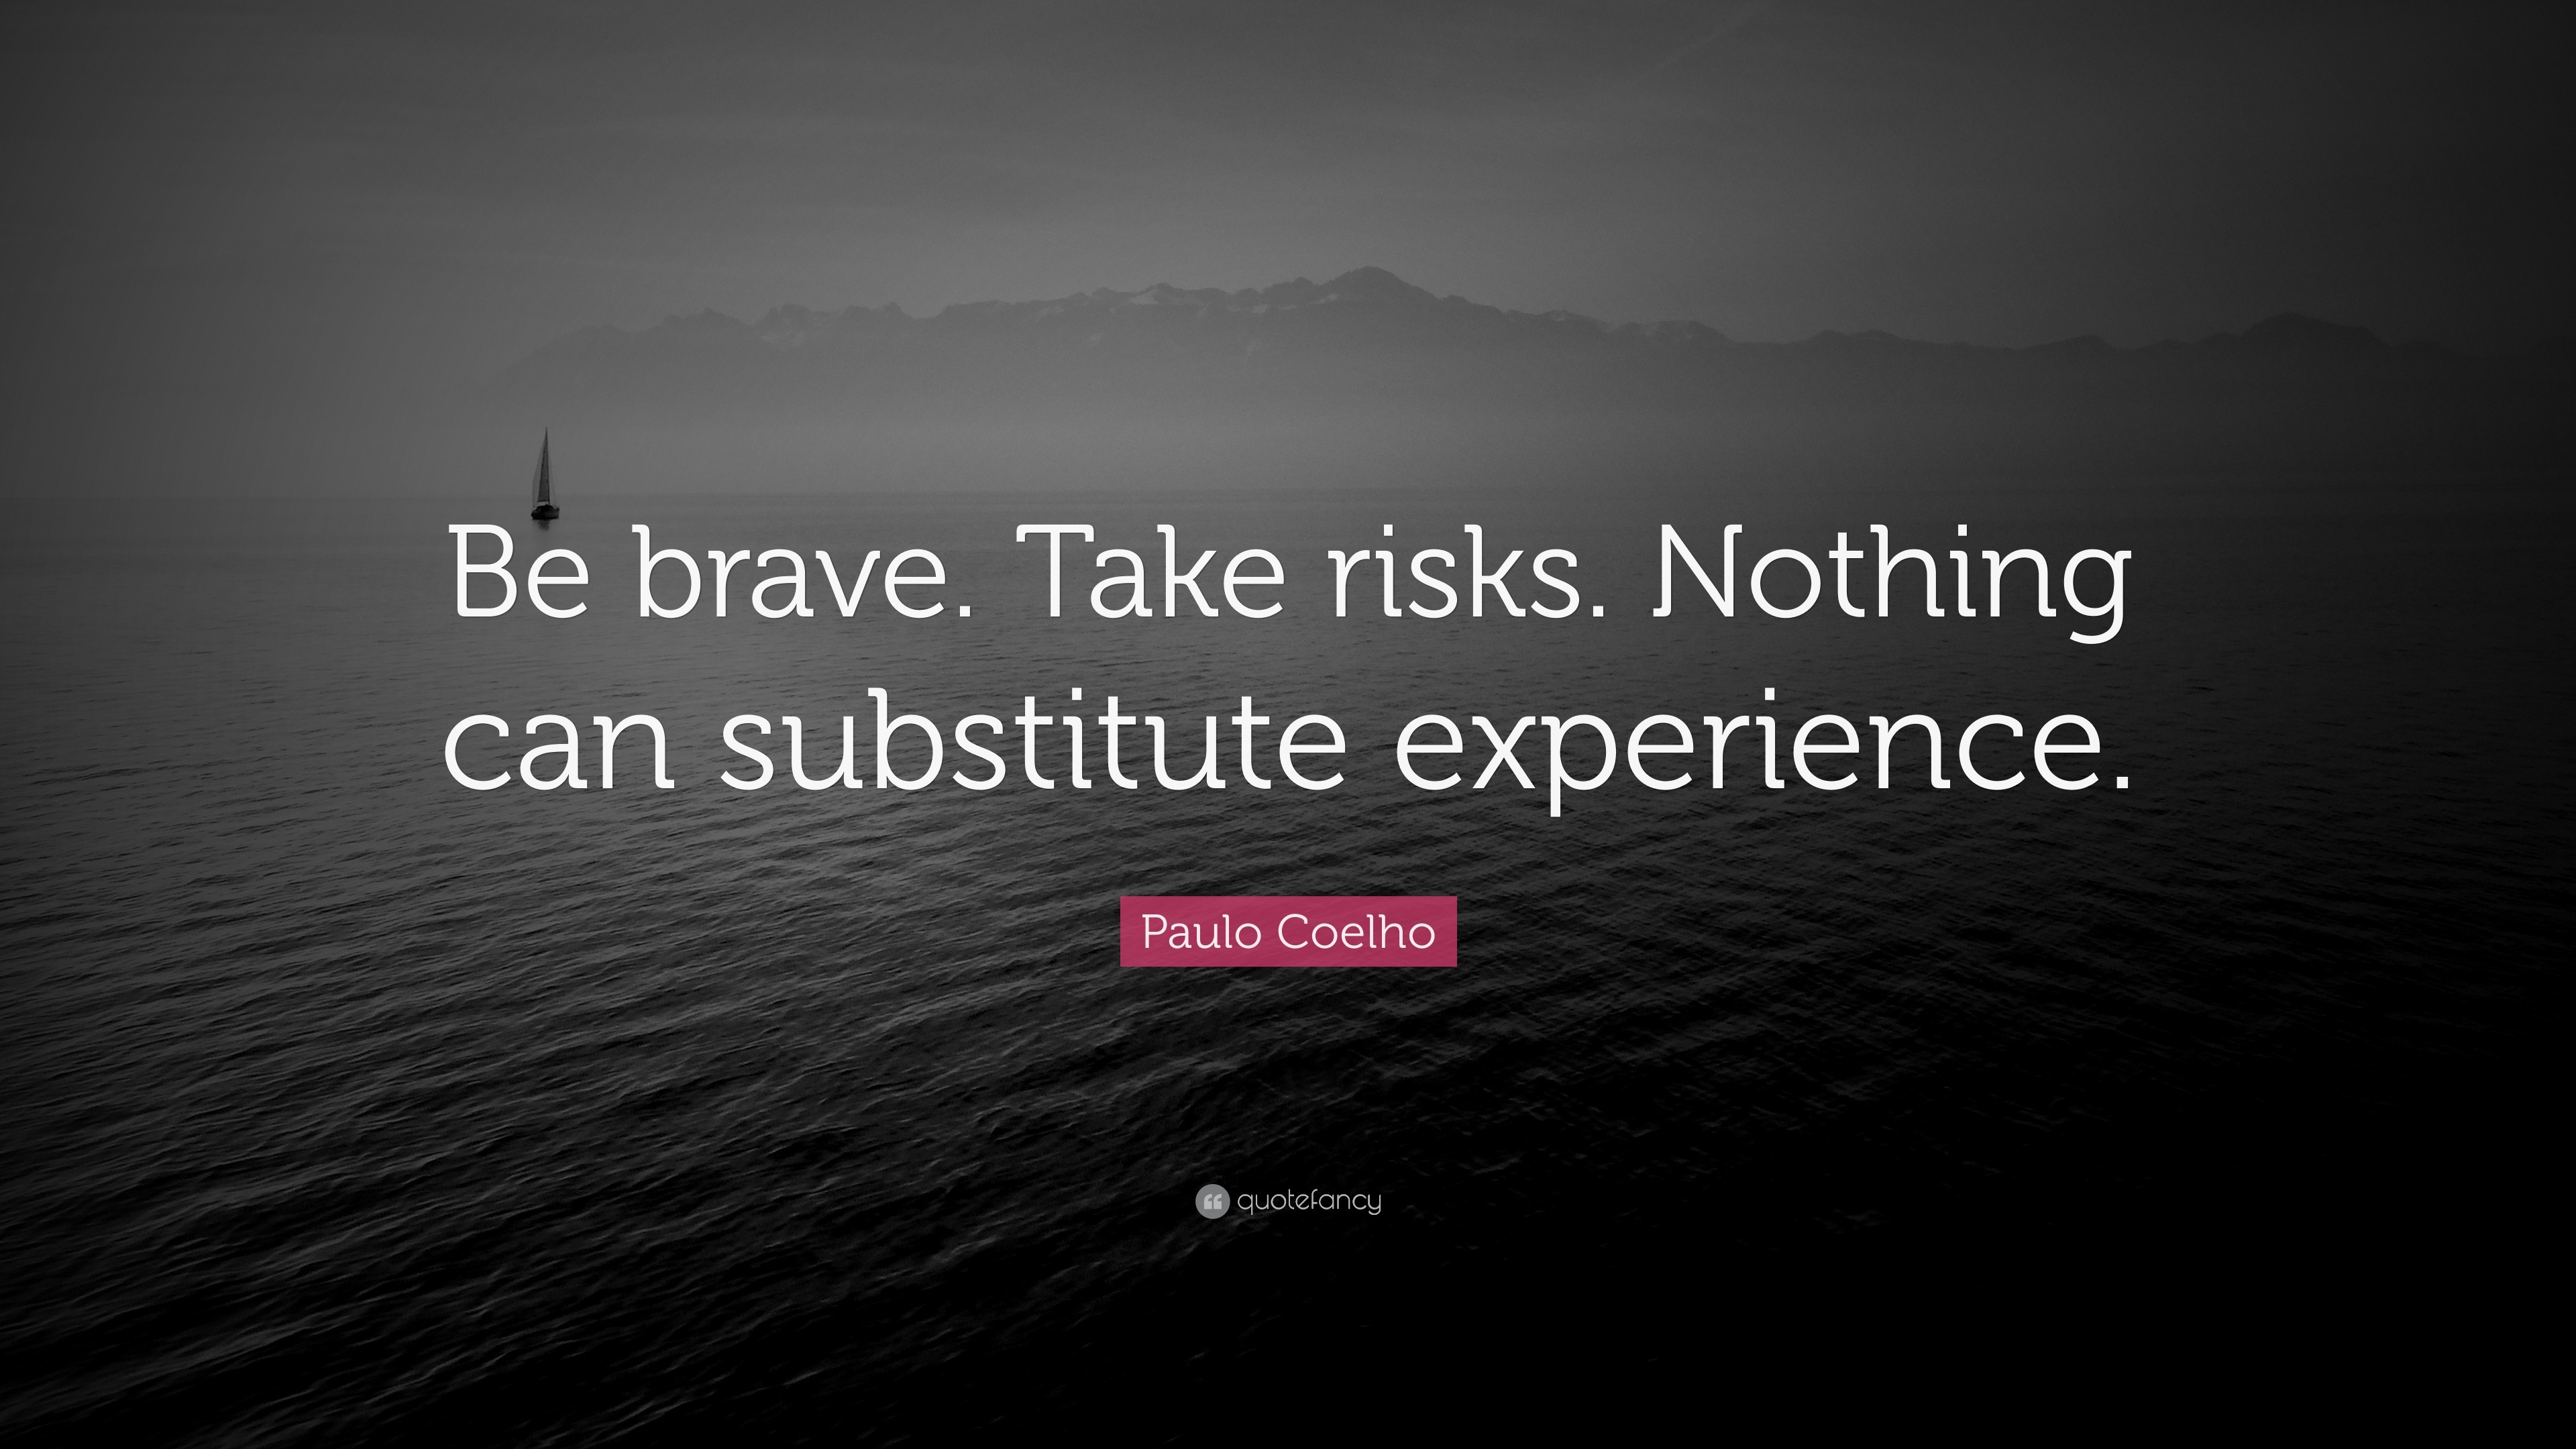 Paulo Coelho Quote “Be brave Take risks Nothing can substitute experience